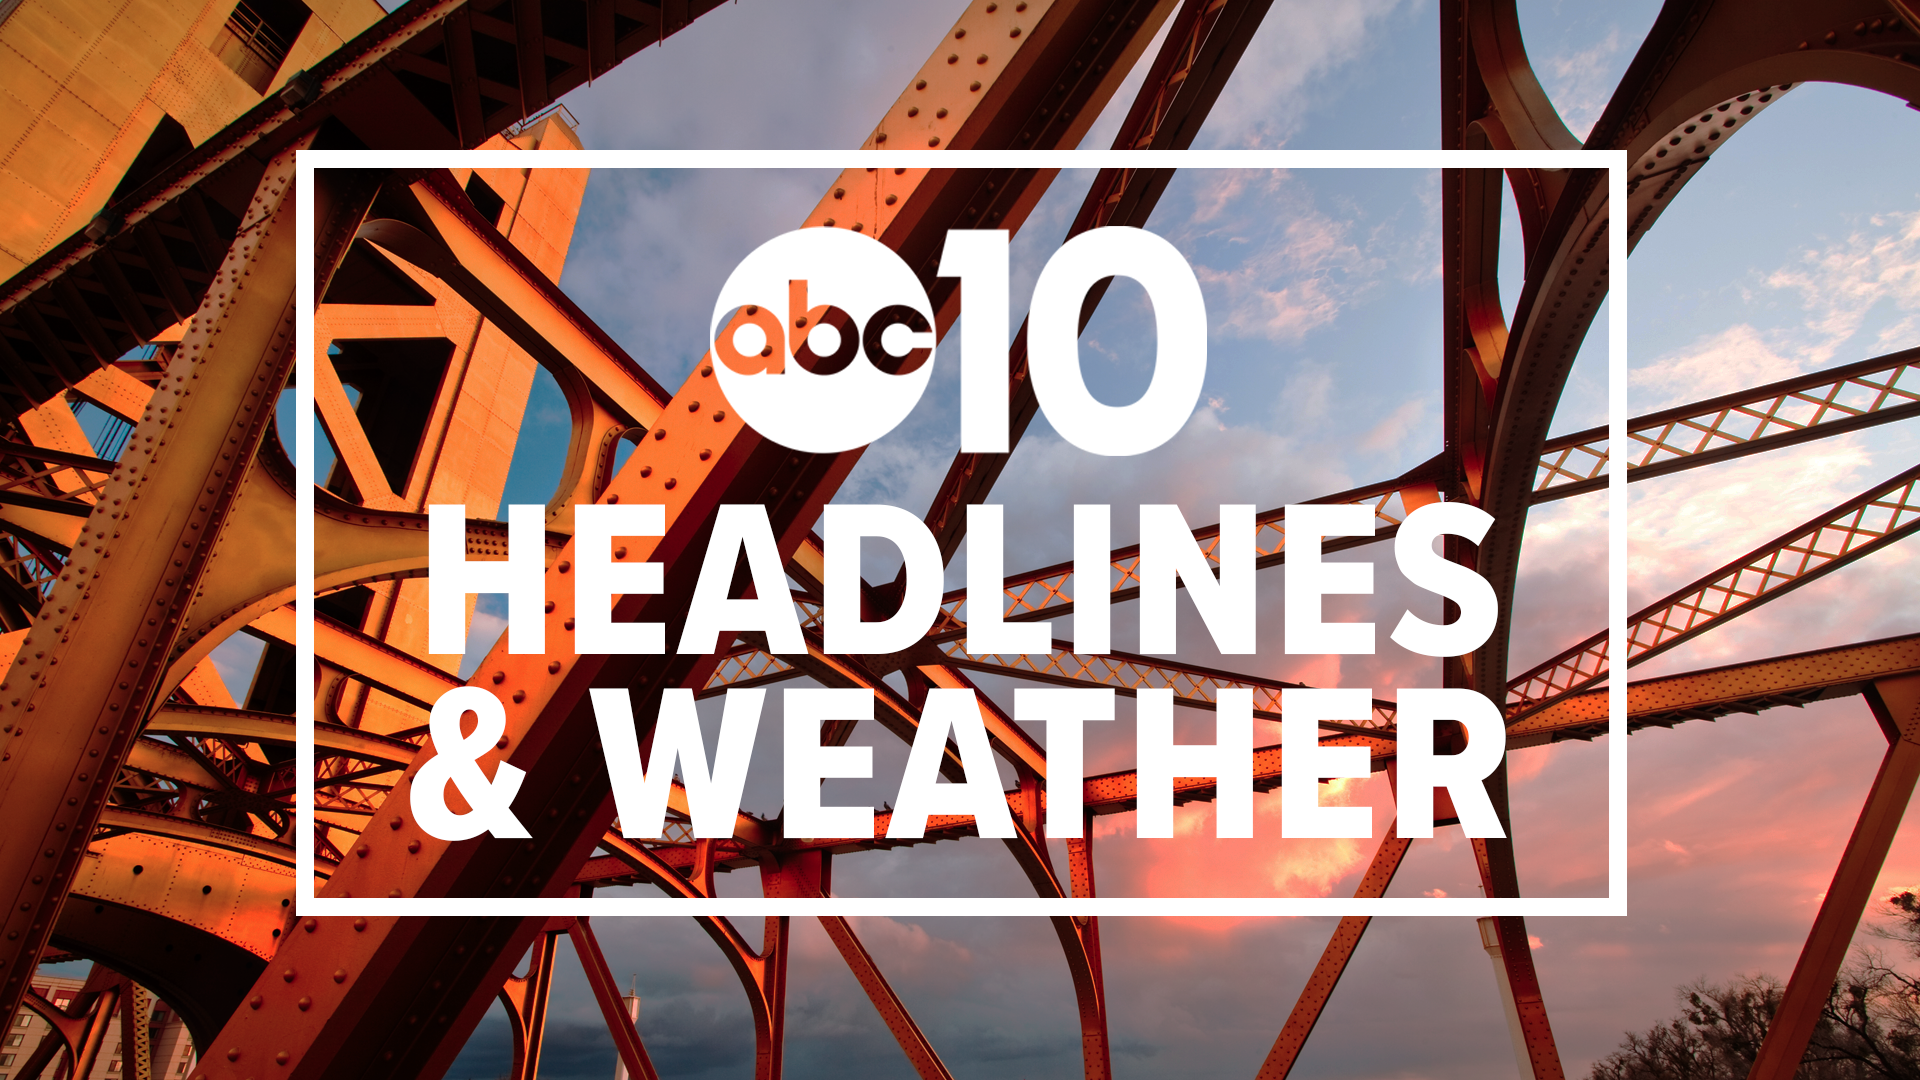 Evening Headlines: October 12, 2019 | Catch in-depth reporting on #LateNewsTonight at 11 p.m. | The latest Sacramento news is always at www.abc10.com